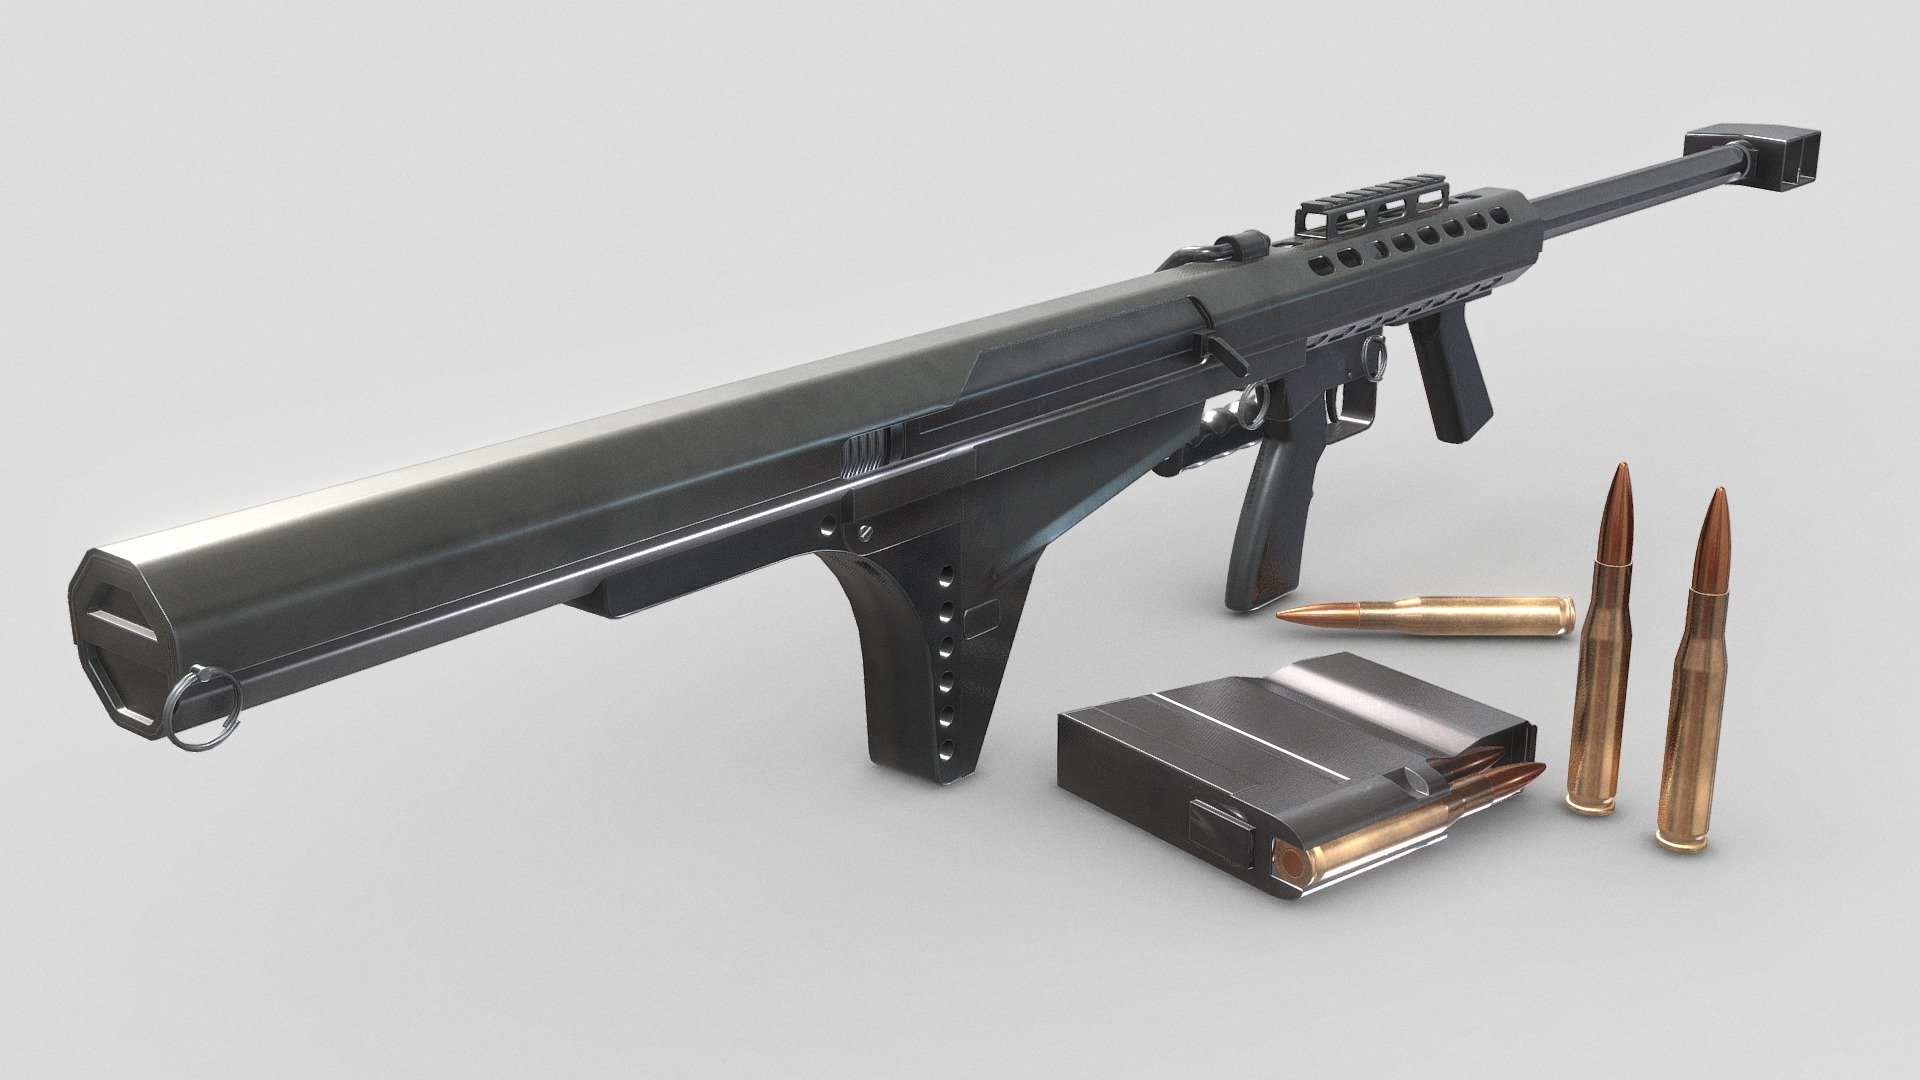 Manufactured as a shoulder firable version of the iconic M82A1 rifle, the M82A2 is of a bullpup design which moves the firing group ahead of the magazine and the buttpad on the back of the magazine well. To create a stable firing position, a reverse angled fore grip is positioned at the front of the receiver.

Model was created in Blender
Baking was done in Marmoset
Texture in SubstancePainter

Tris 16 026
Tex 4K/8K - Barrett M82A2 Rifle - Buy Royalty Free 3D model by Ovidiu Barat (@OvidiuBarat) 3d model